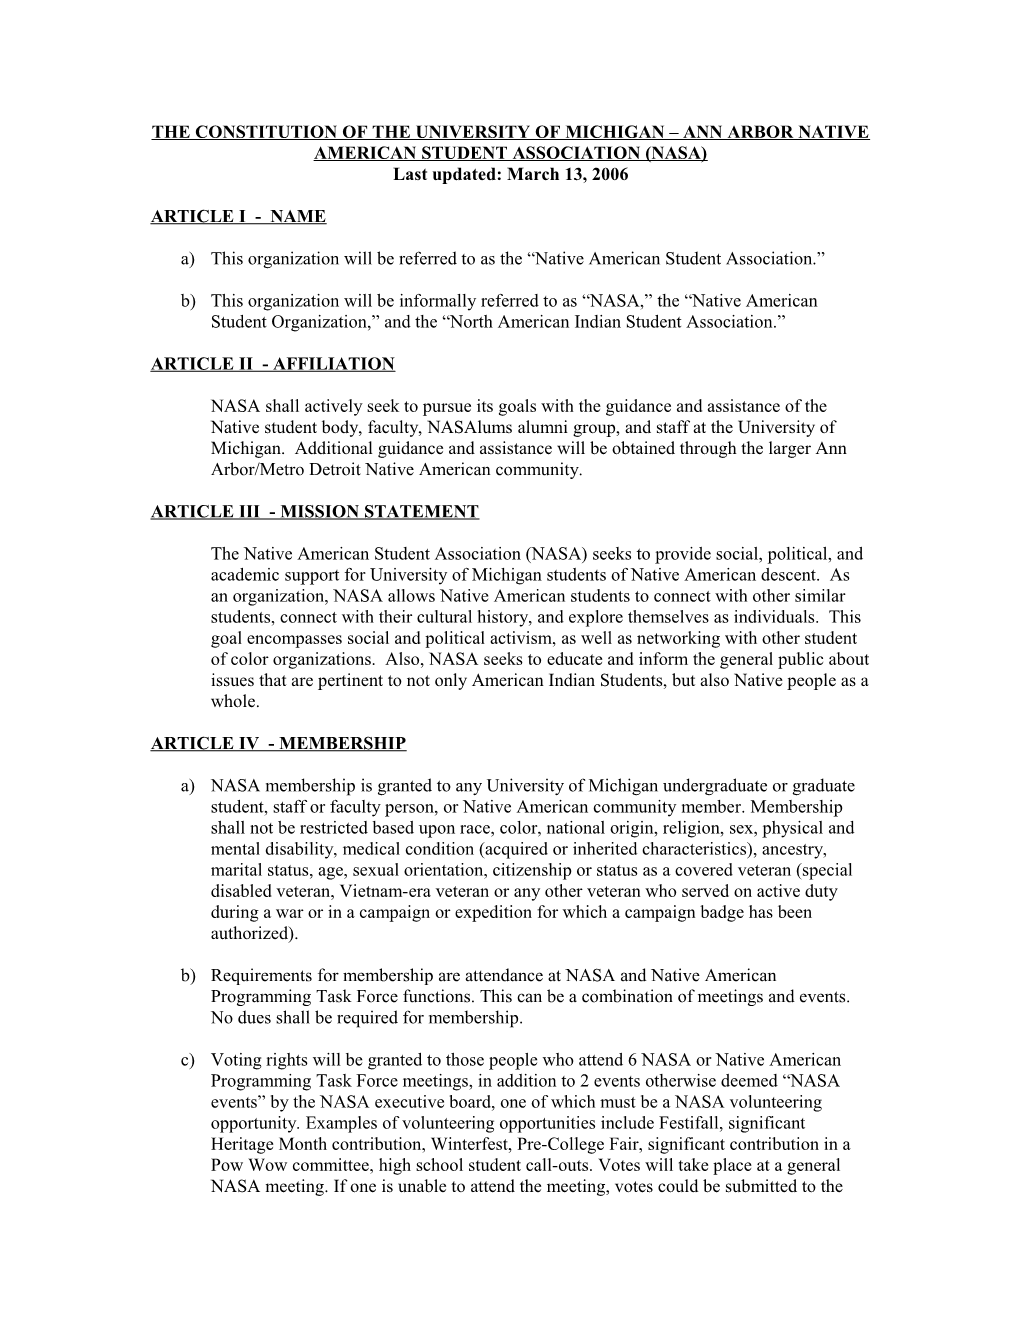 The Constitution of the University of Michigan Ann Arbor Native American Student Association